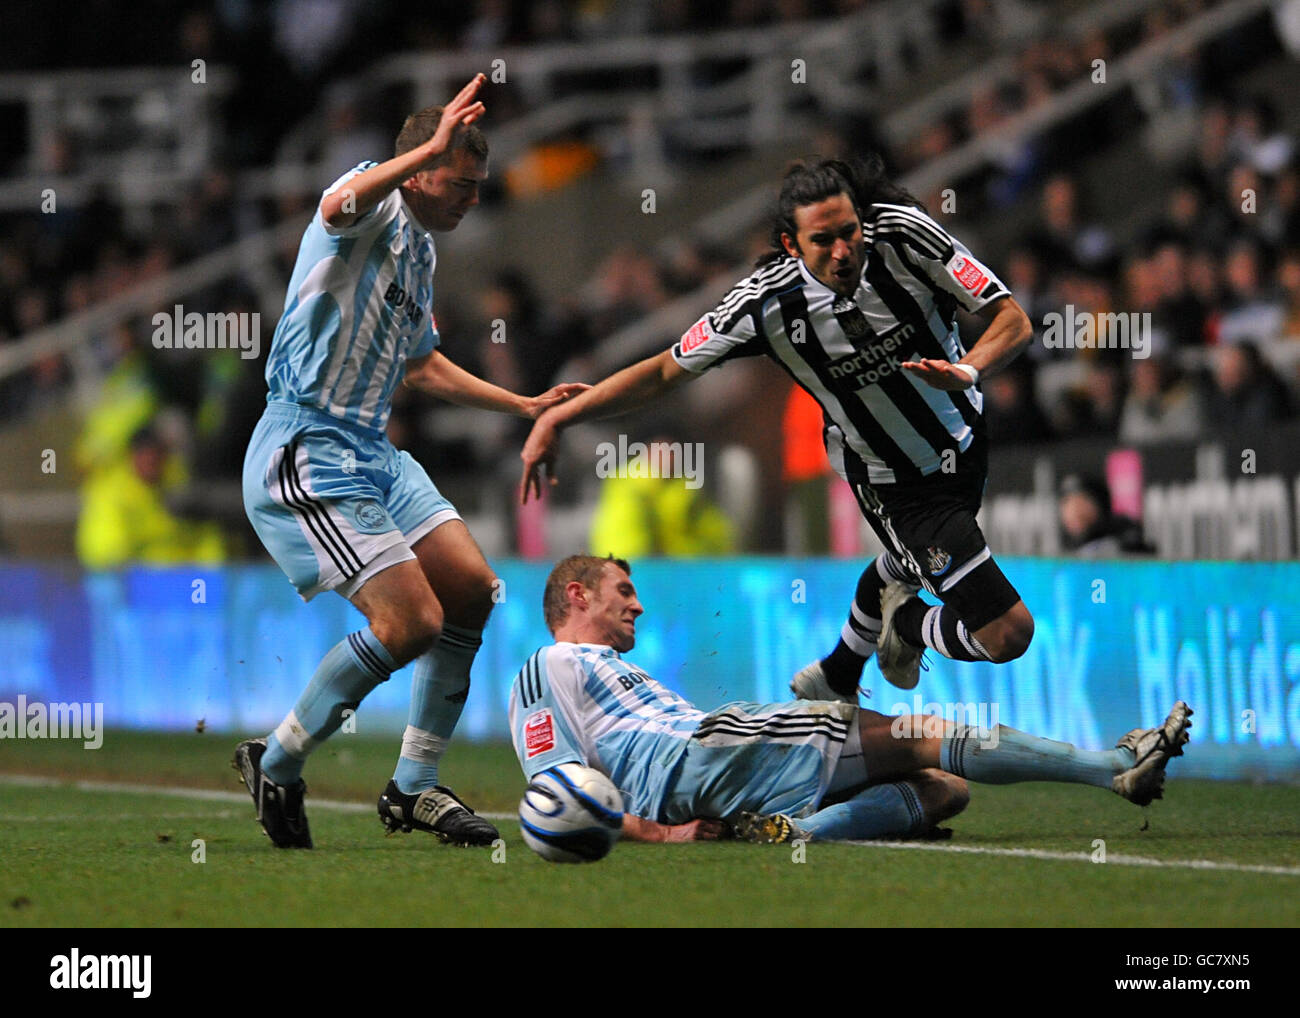 Newcastle United's Jonas Gutierrez is fouled by Derby County's Rob Hulse during the Coca-Cola Championship match at St James' Park, Newcastle. Stock Photo